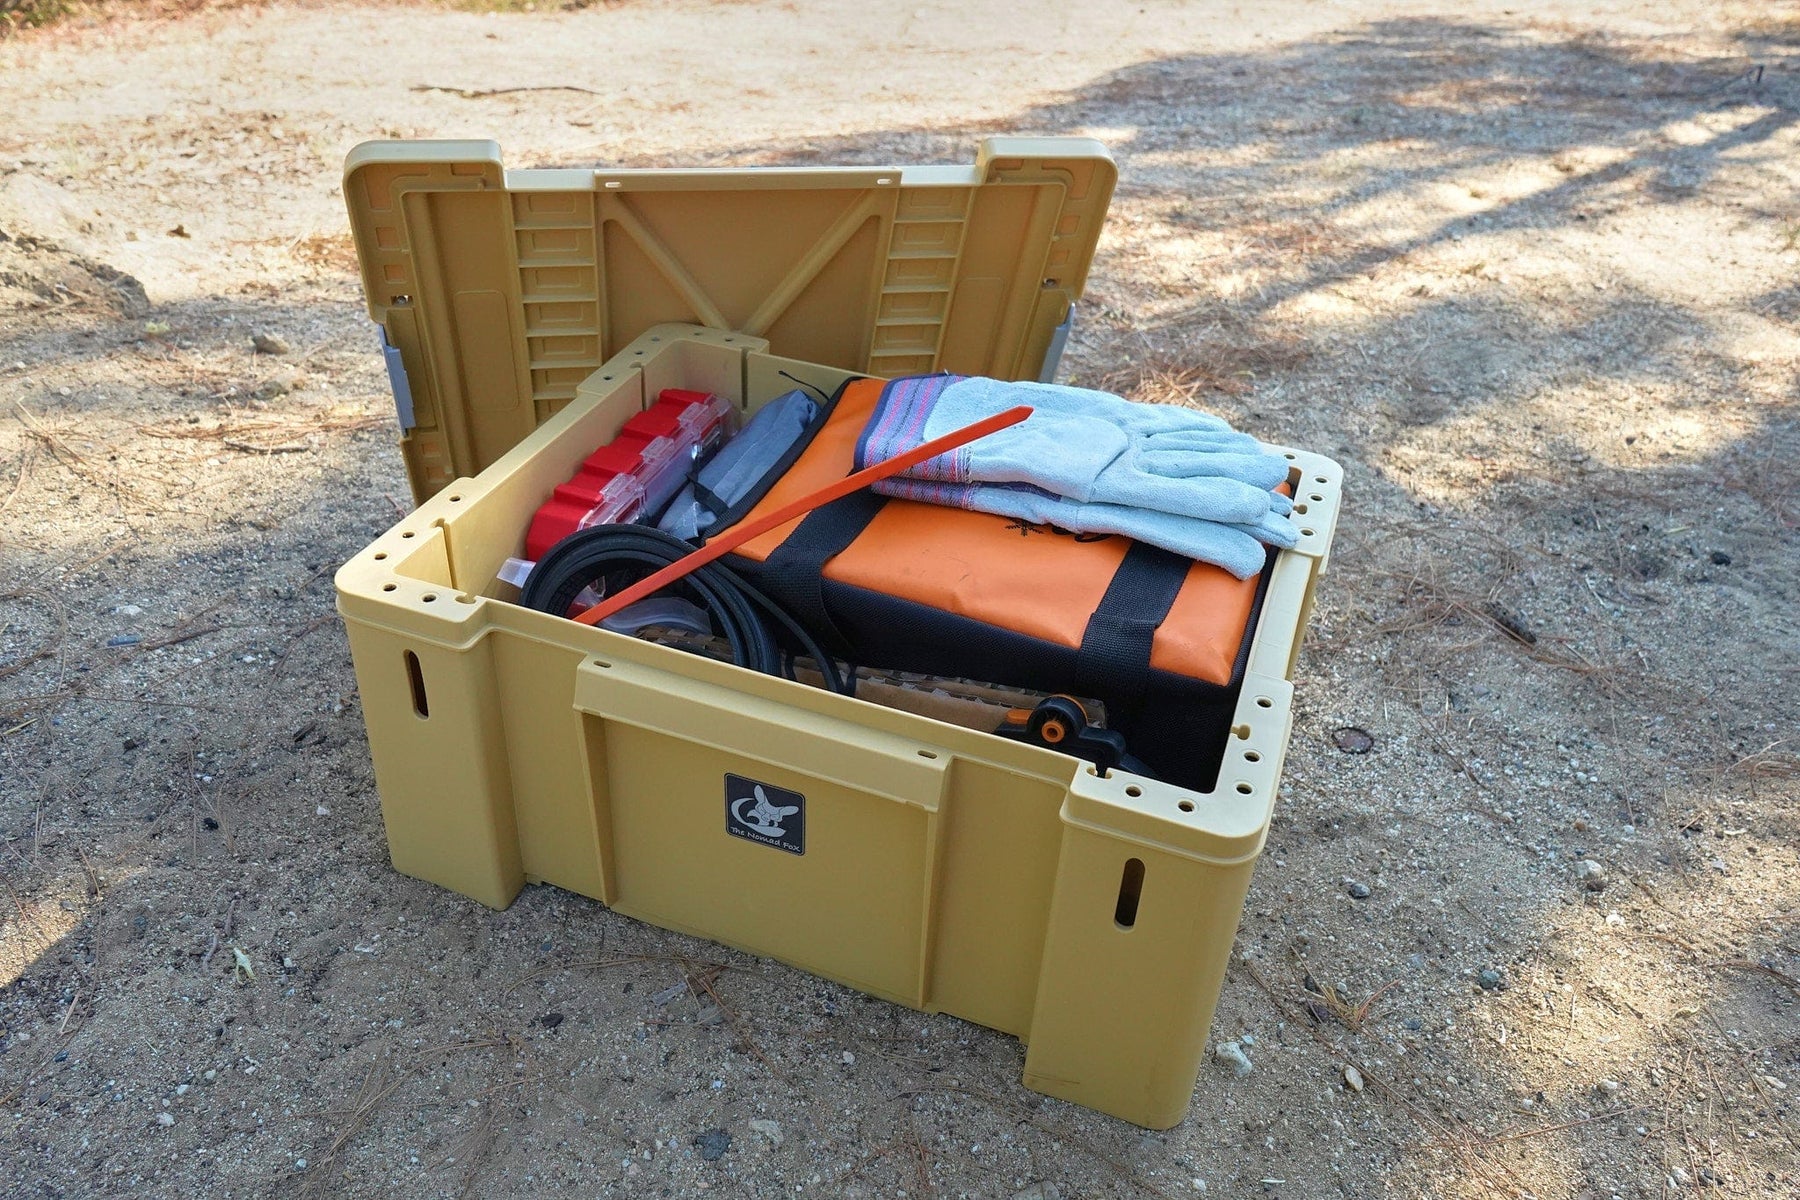 The Nomad Storage Box  Boxes & Bags Nomad Fox- Adventure Imports